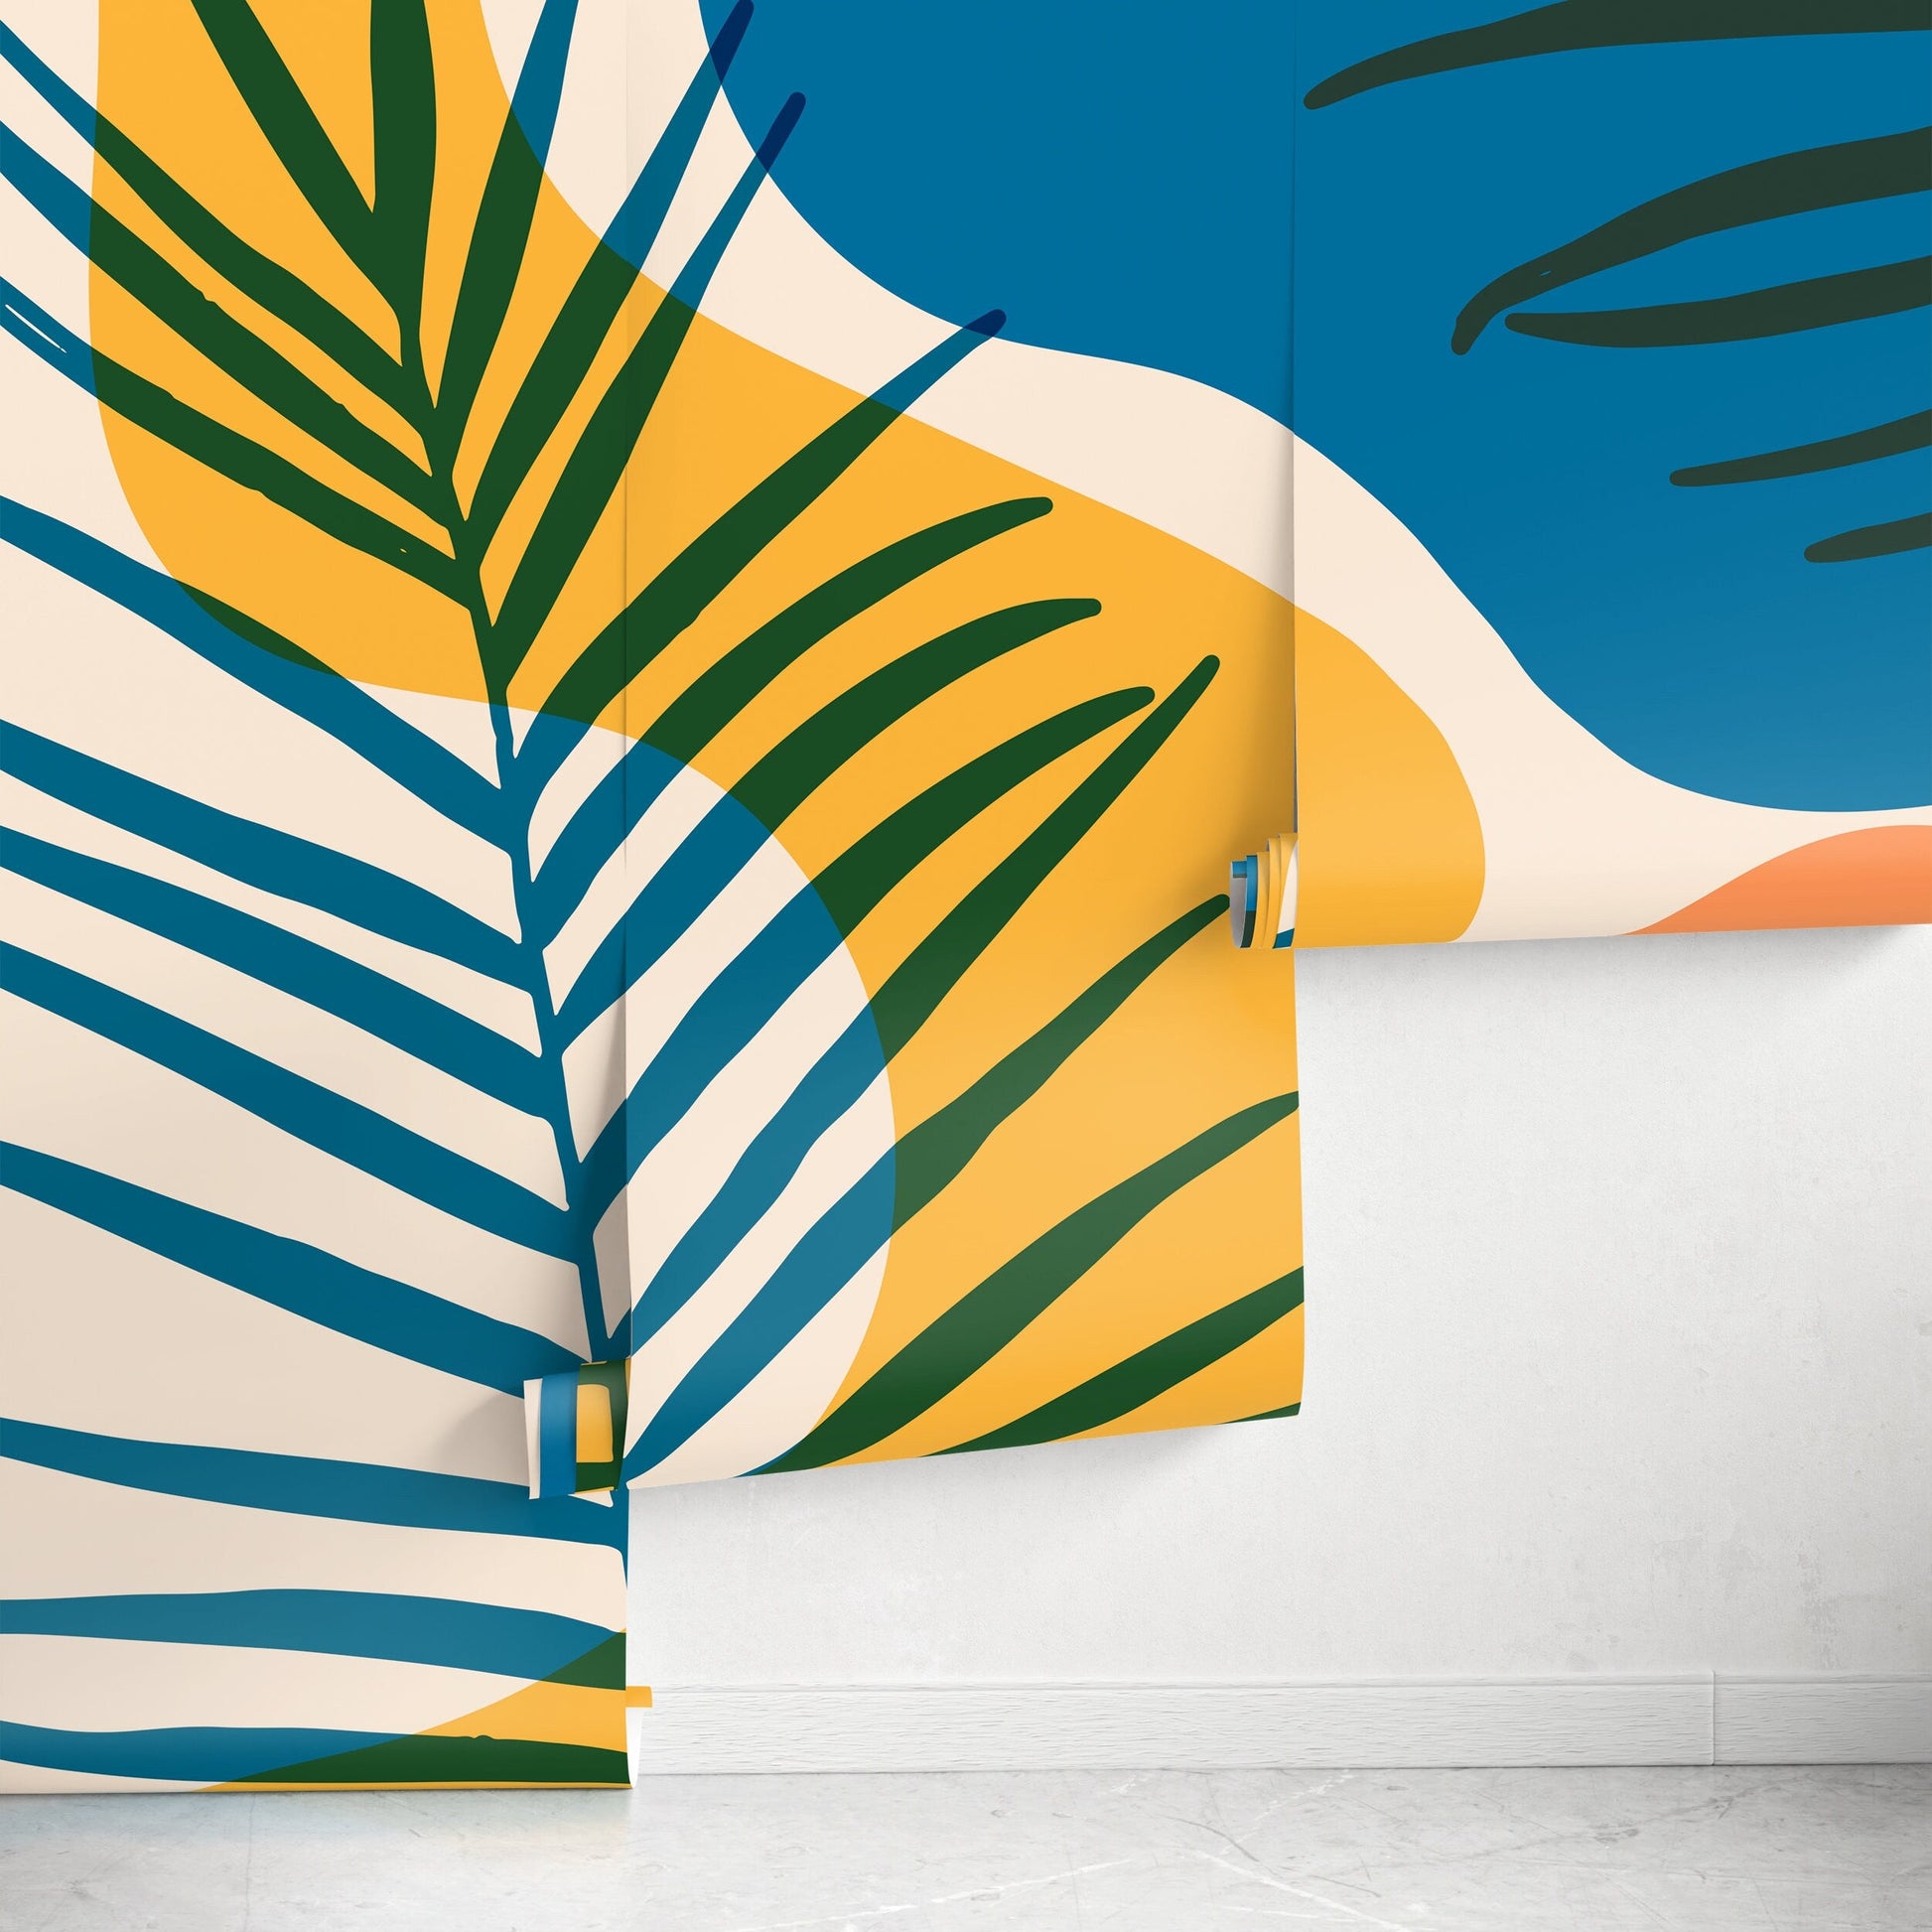 Colorful Palms Mural Removable Wallpaper Wall Tropical - B959